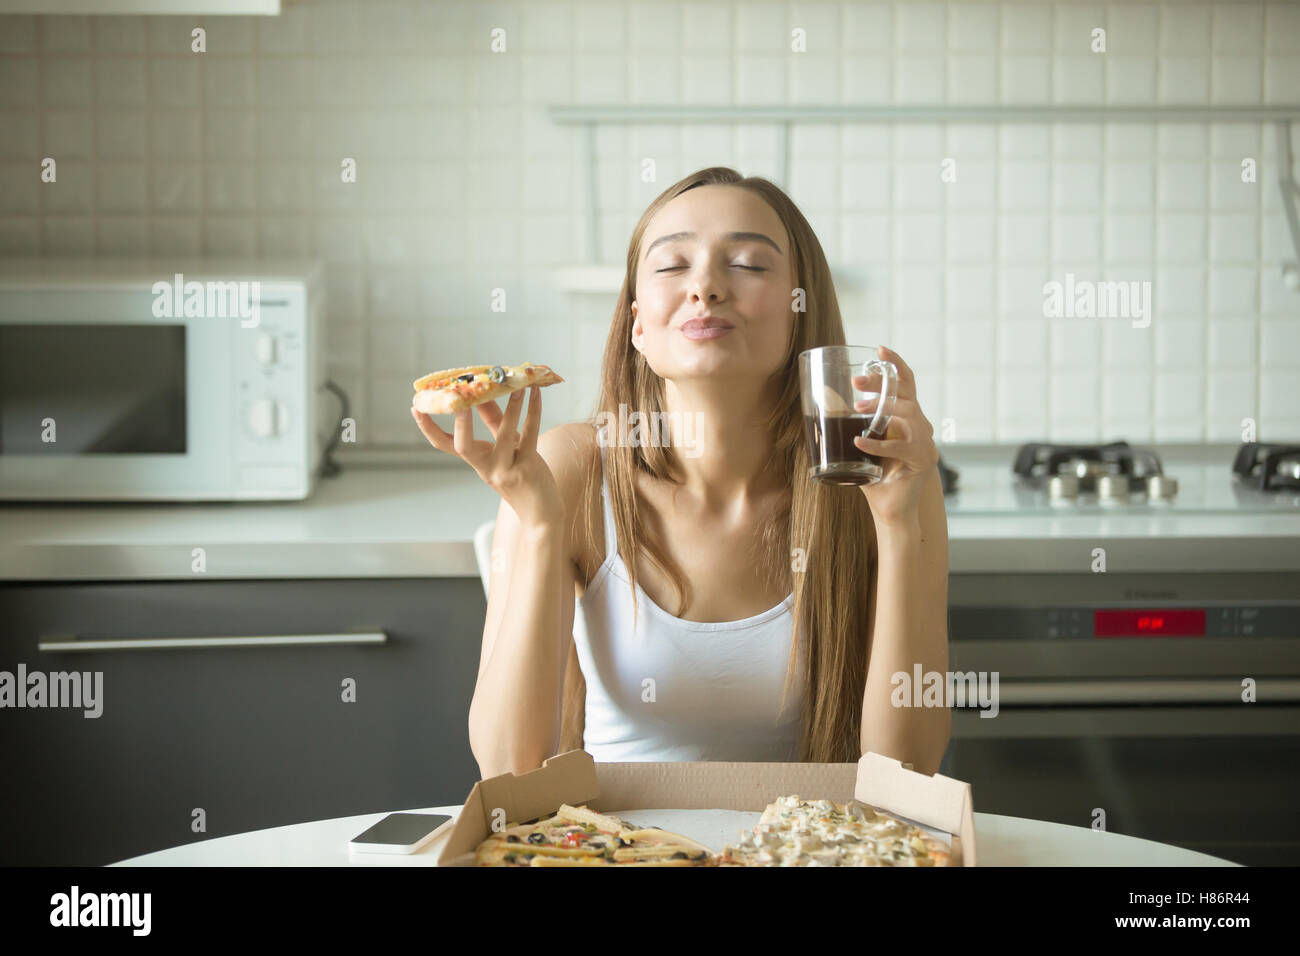 Portrait of a smiling woman with pizza in her hand Stock Photo